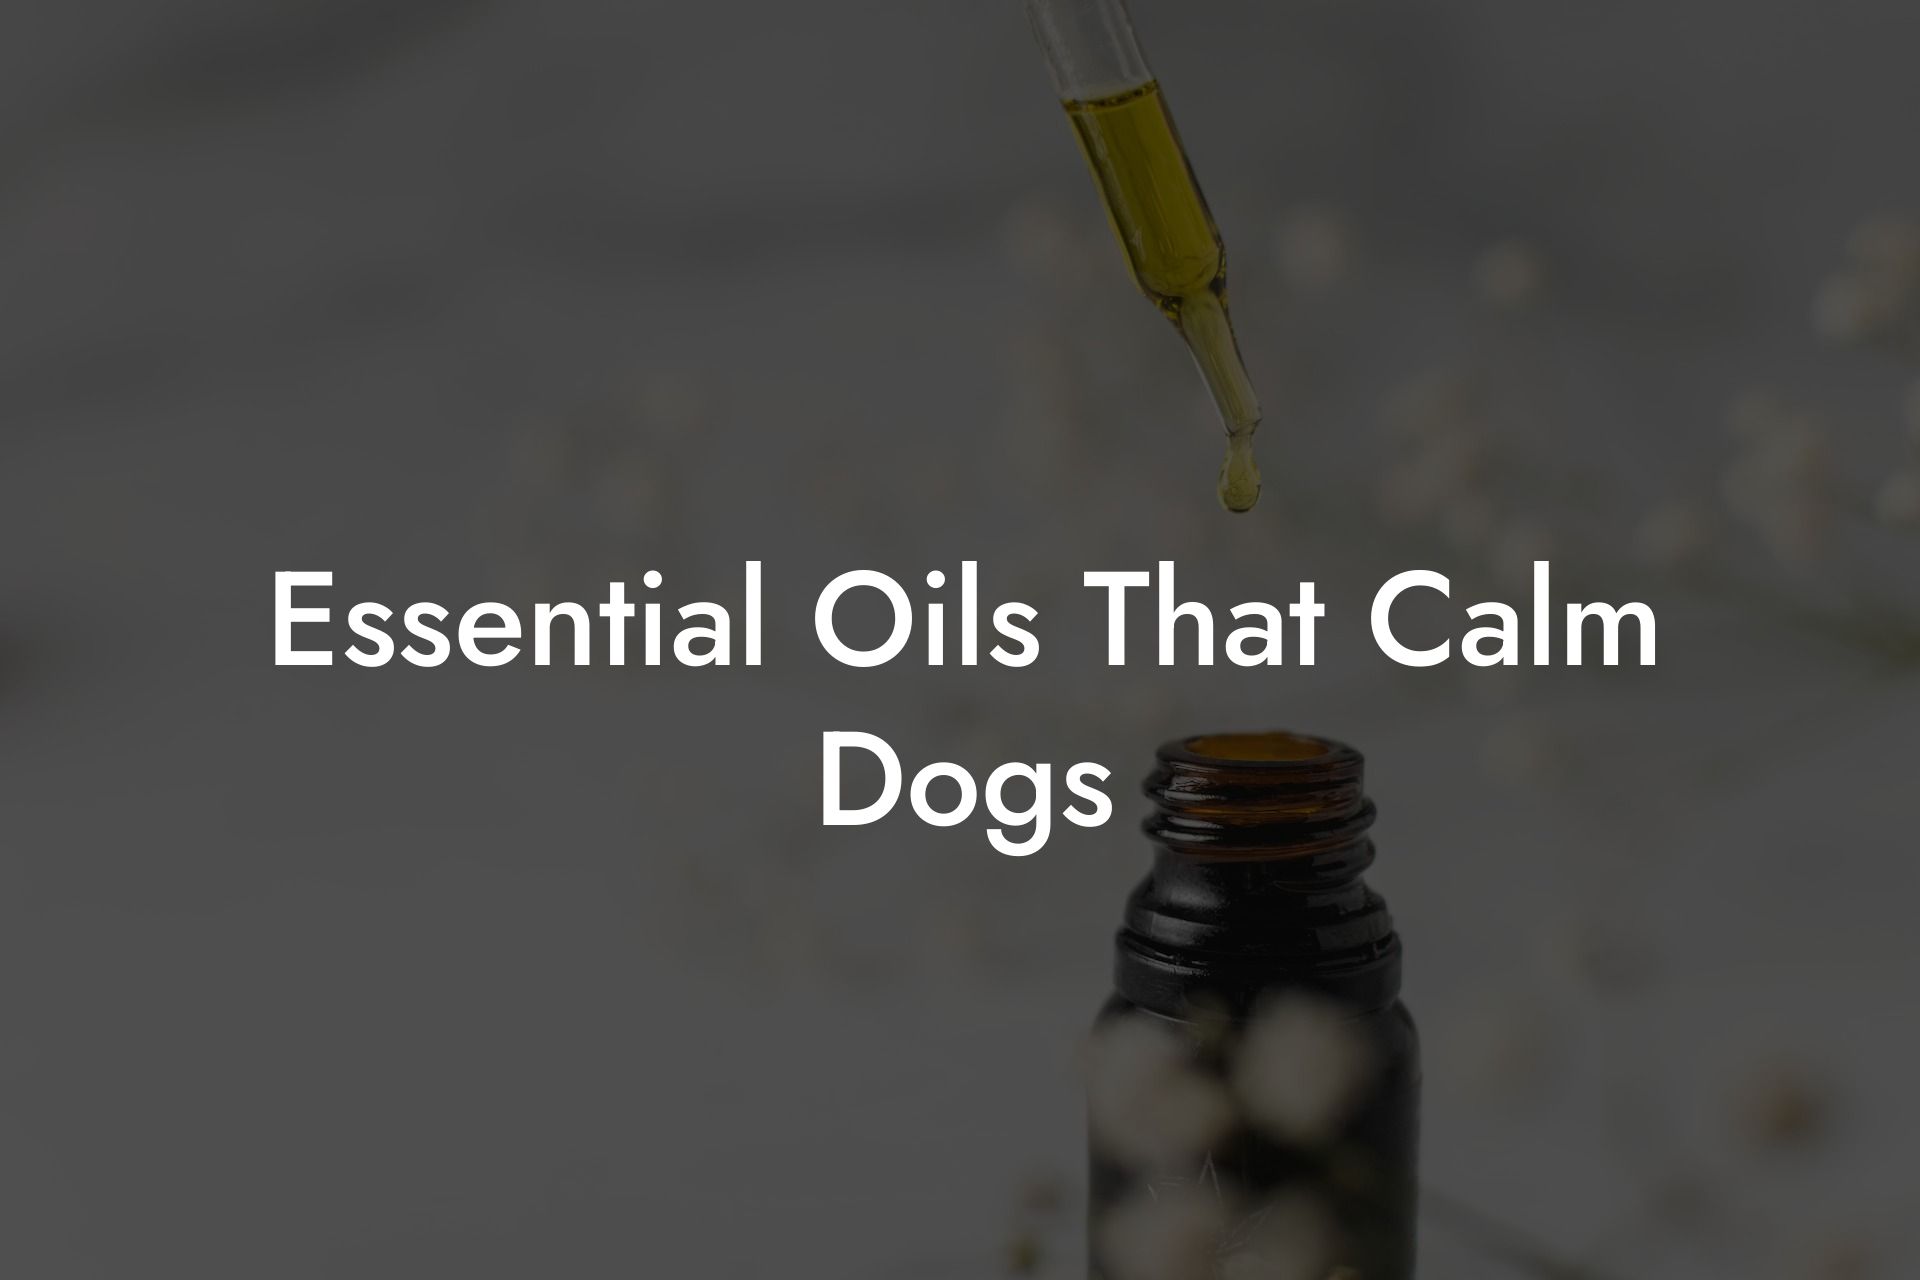 Essential Oils That Calm Dogs